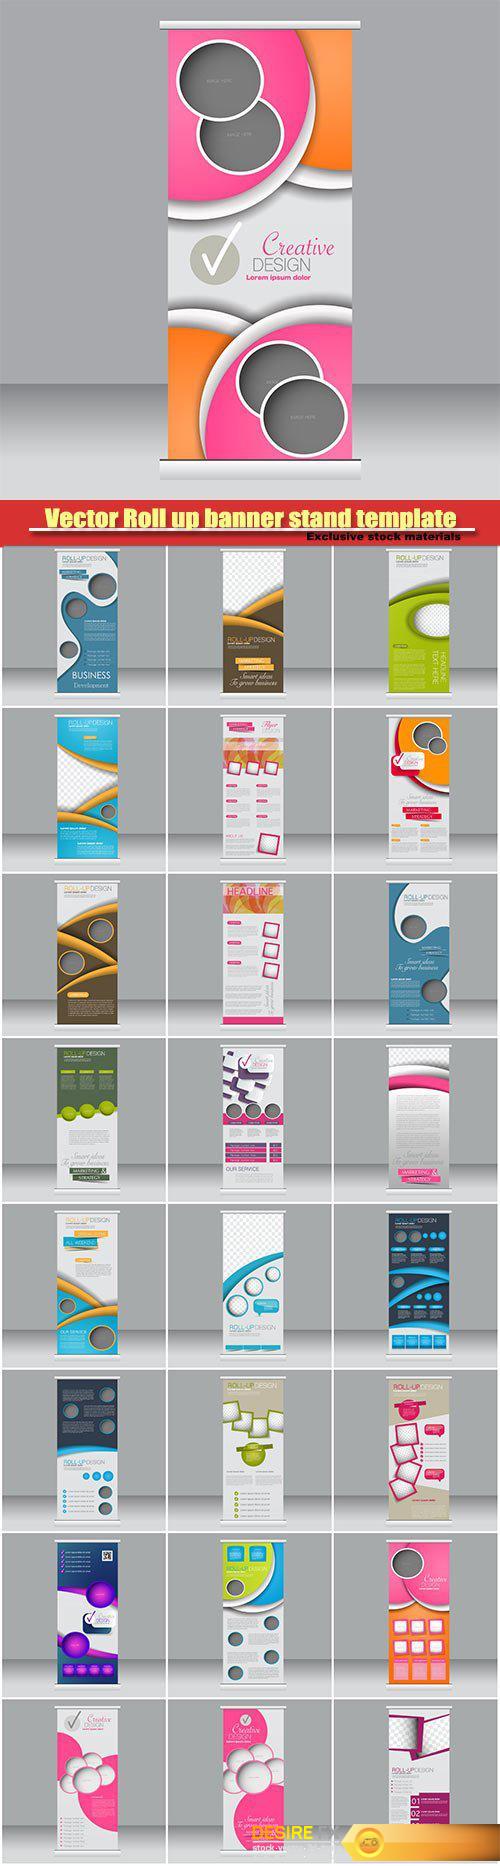 Vector Roll up banner stand template, abstract background for design, business, education, advertisement #2